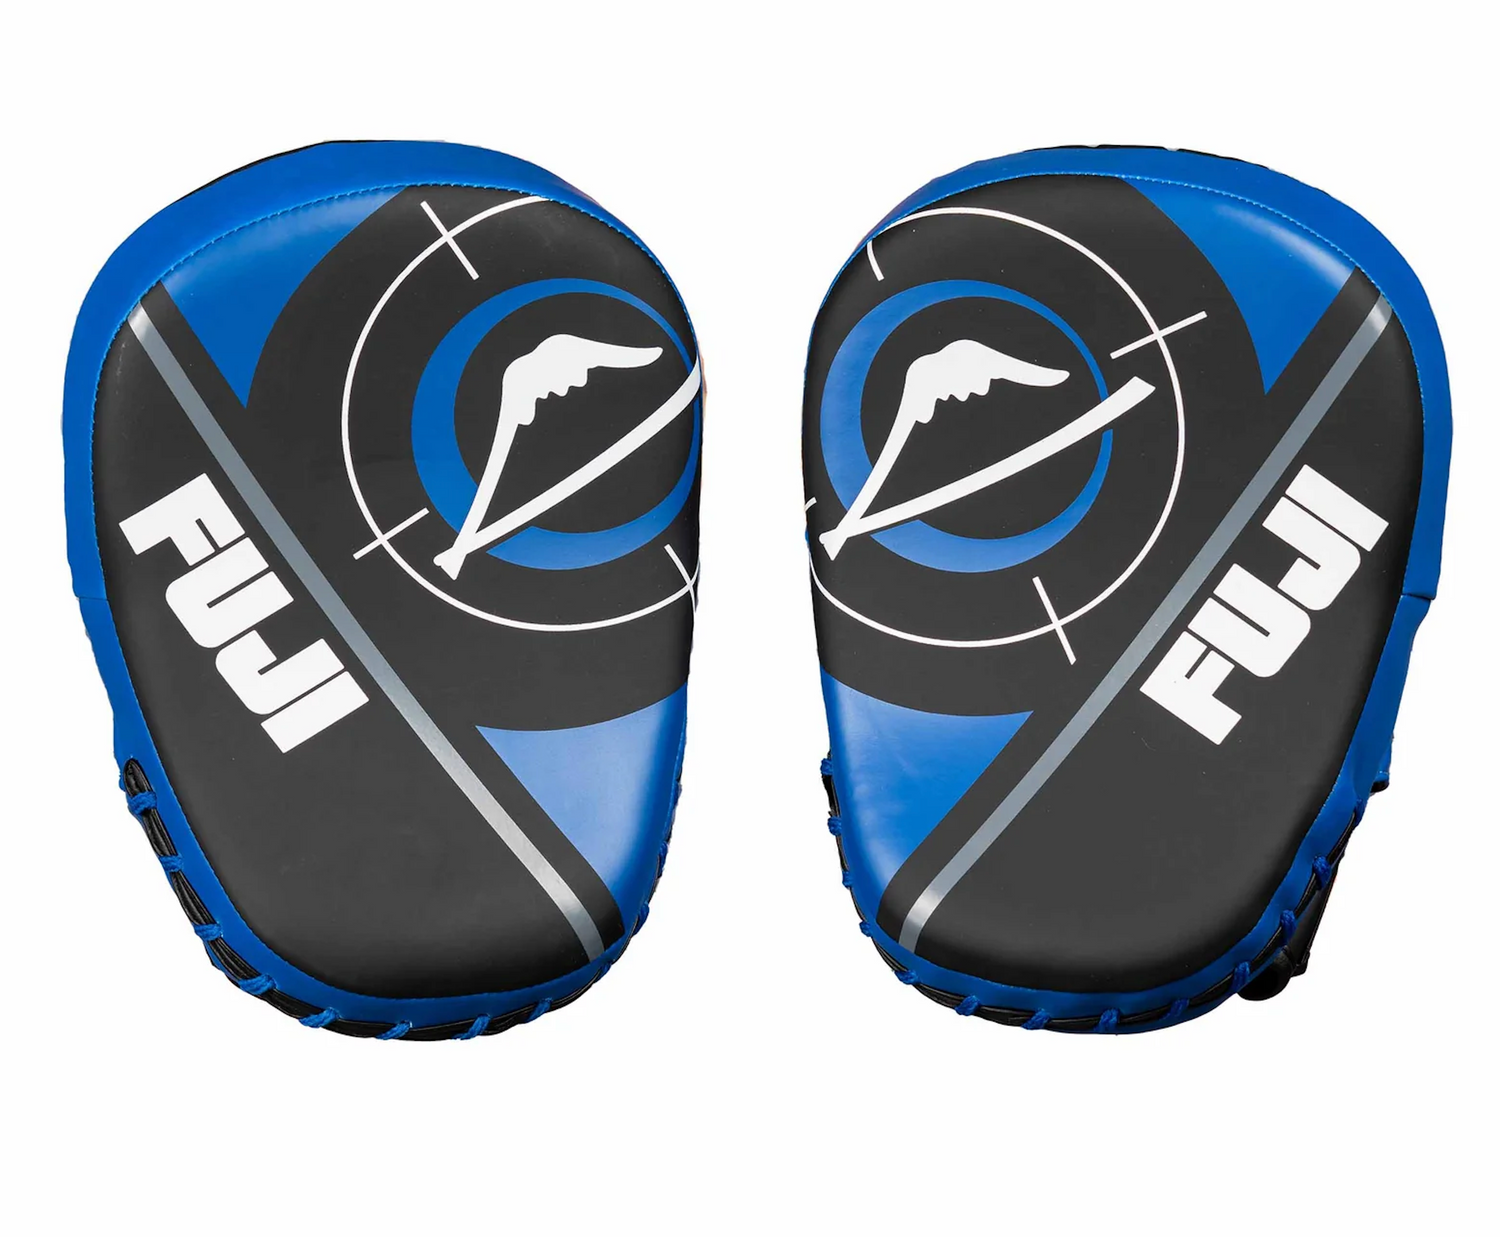 Precision Striking Focus Mitts by Fuji